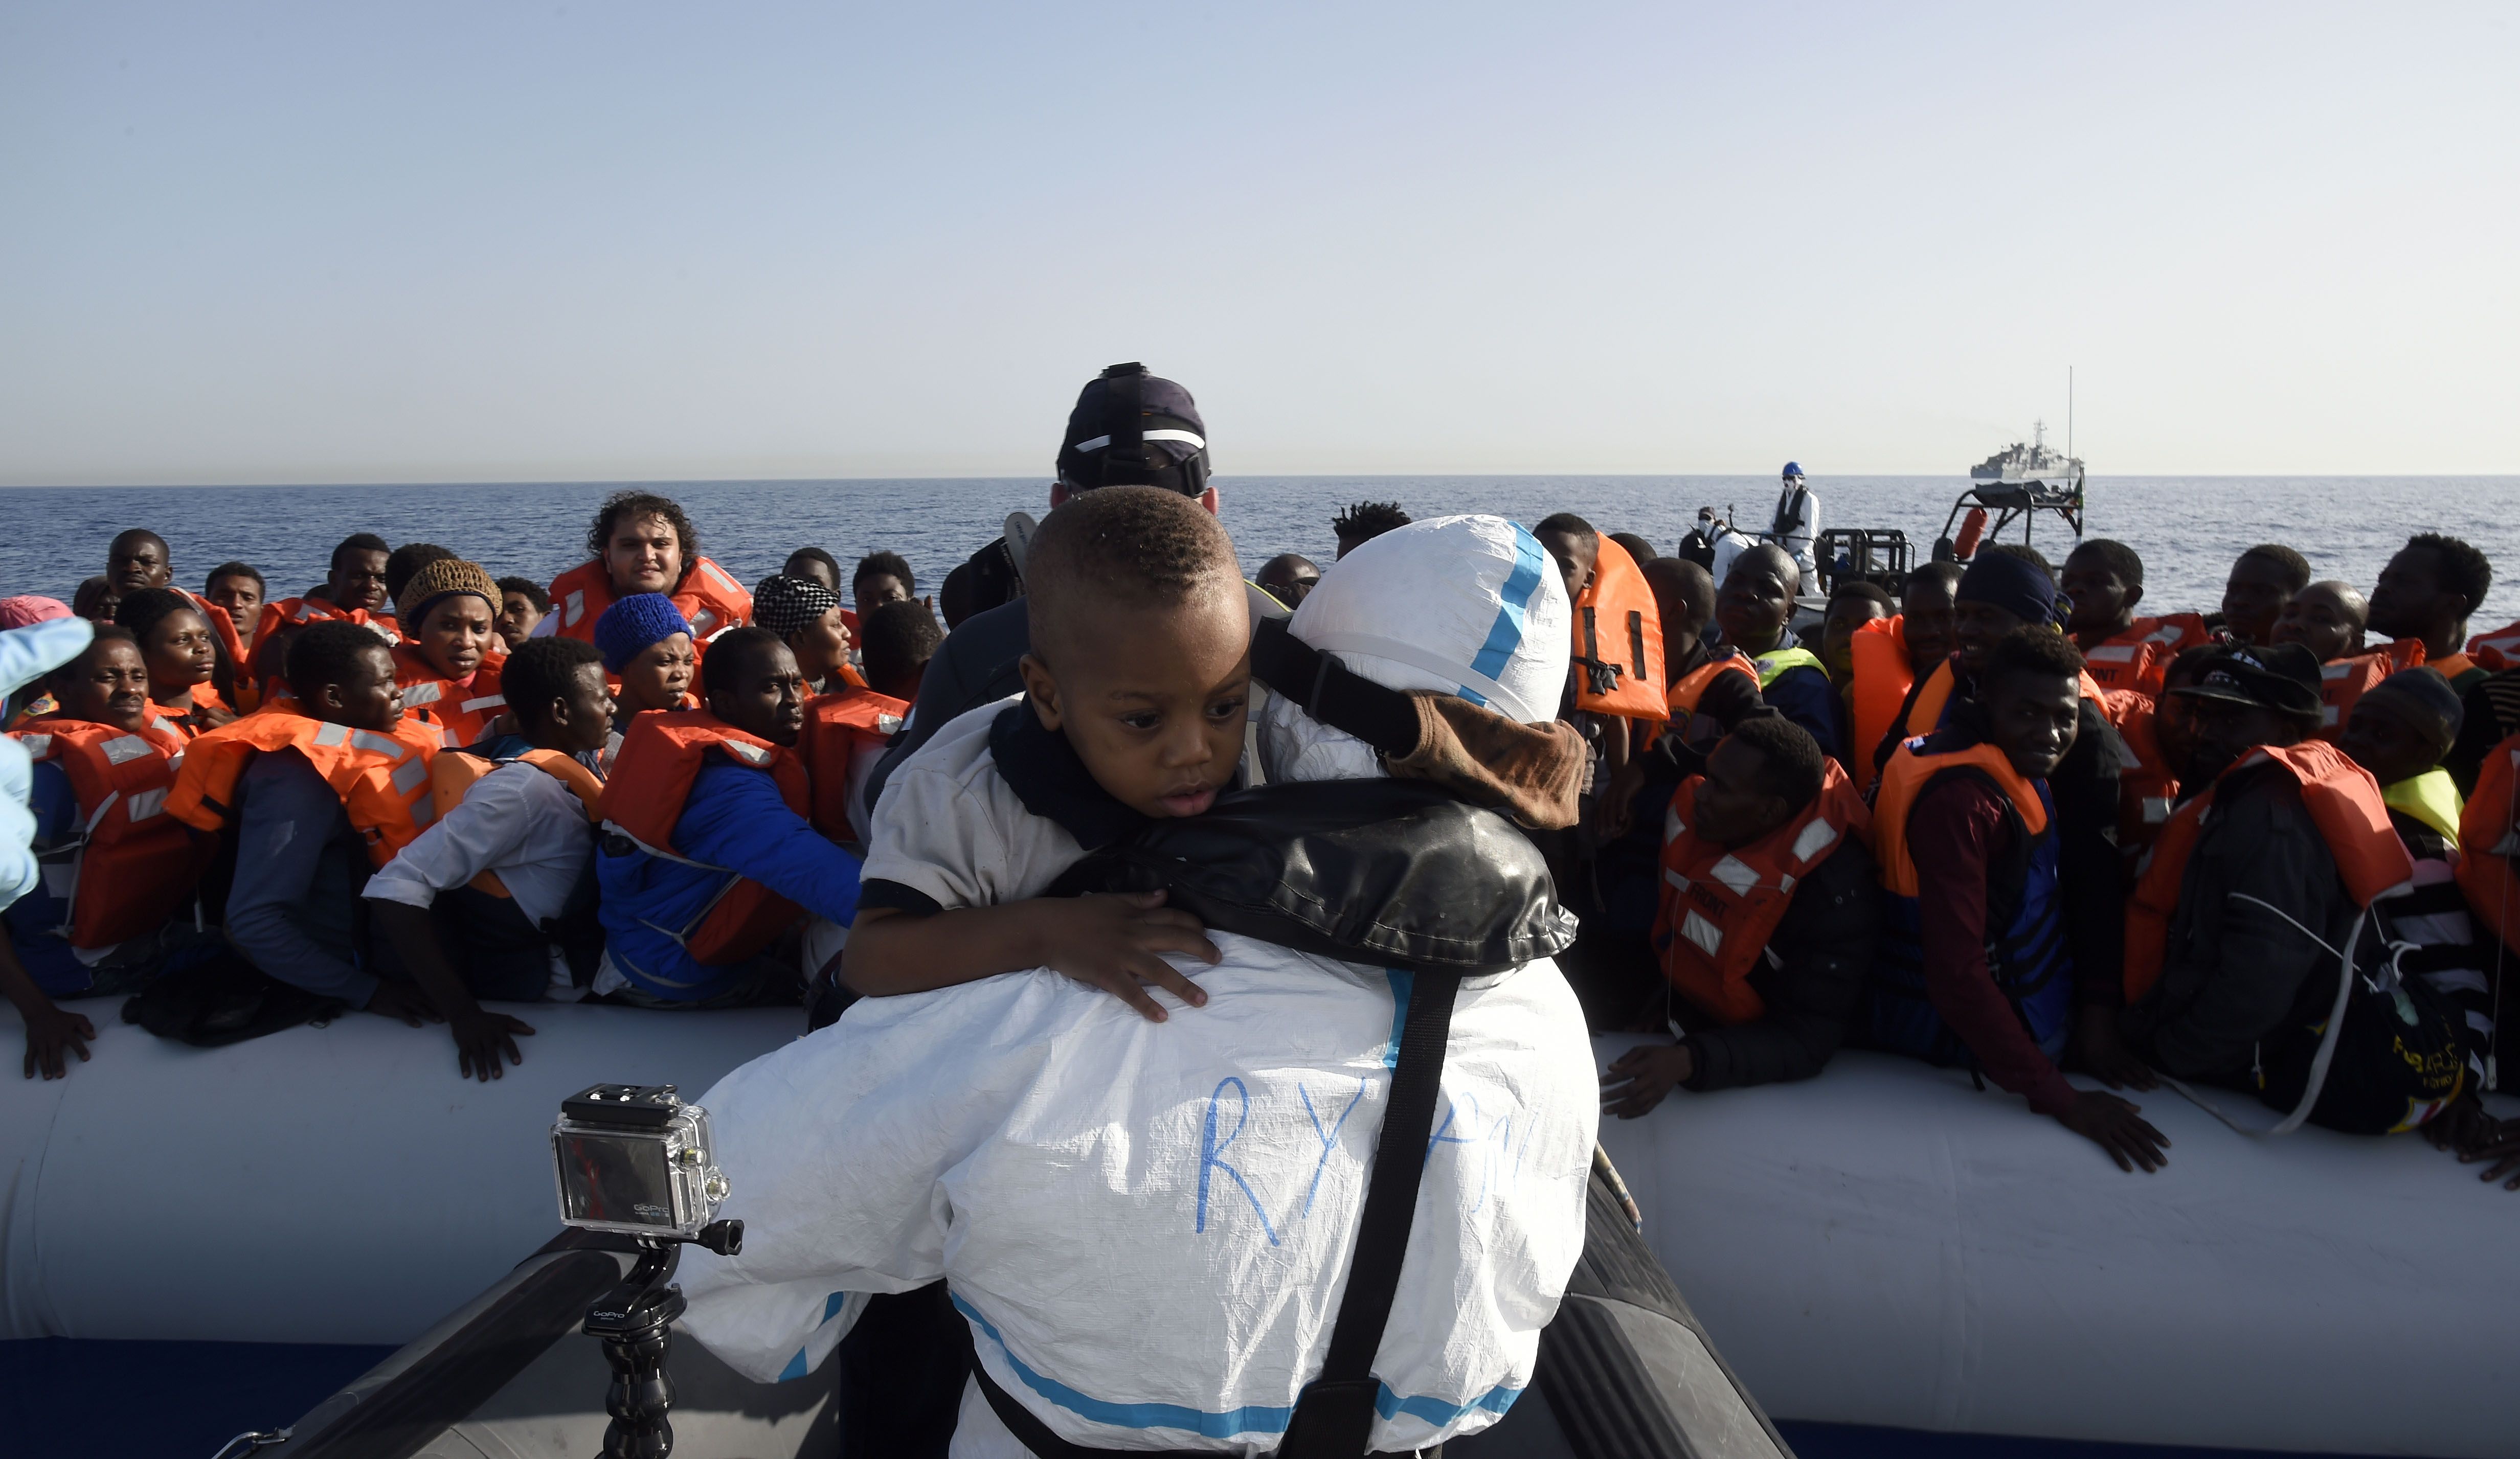 LÉ Róisín rescues 371 migrants in three separate search and rescue operations 37 nautical miles NW of Tripoli. Image courtesy of the Irish Defence Forces. Greece, 2016.